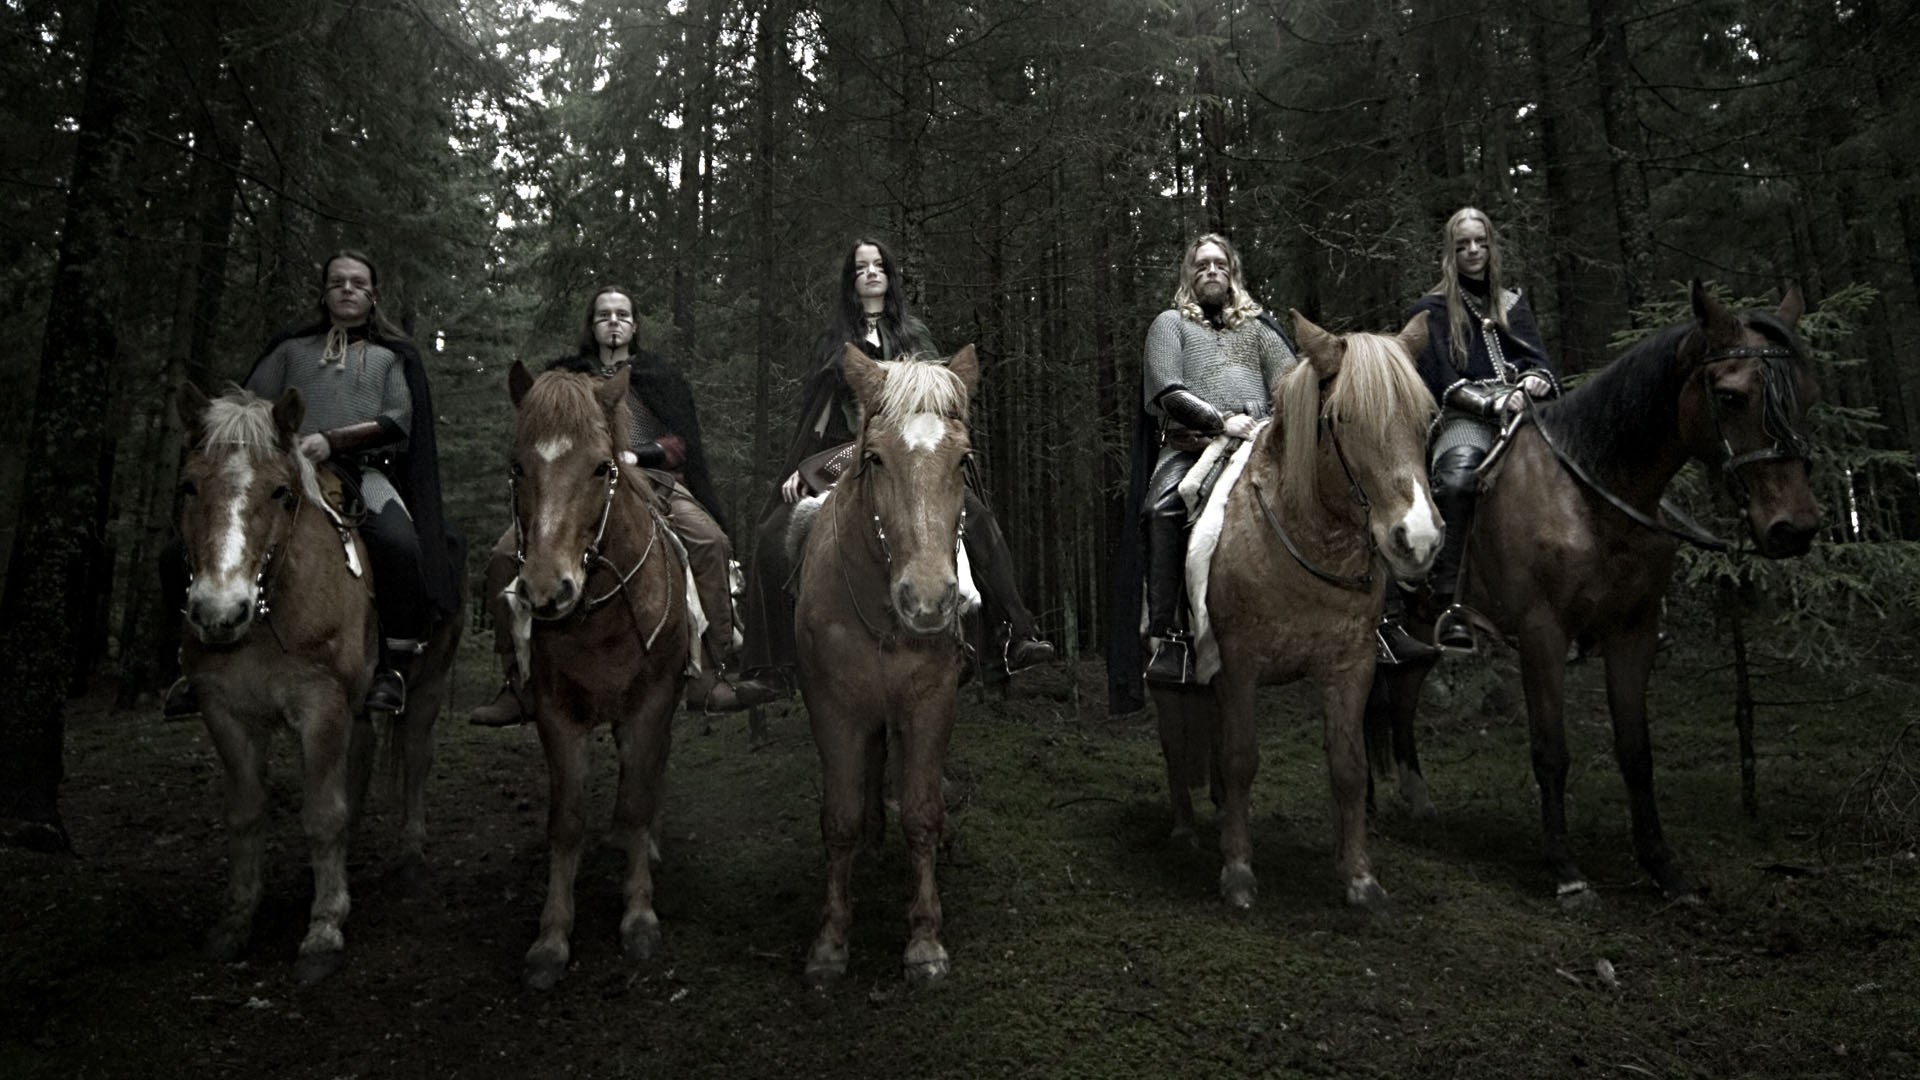 1920x1080  Wallpaper ensiferum, horse, forest, trees, band